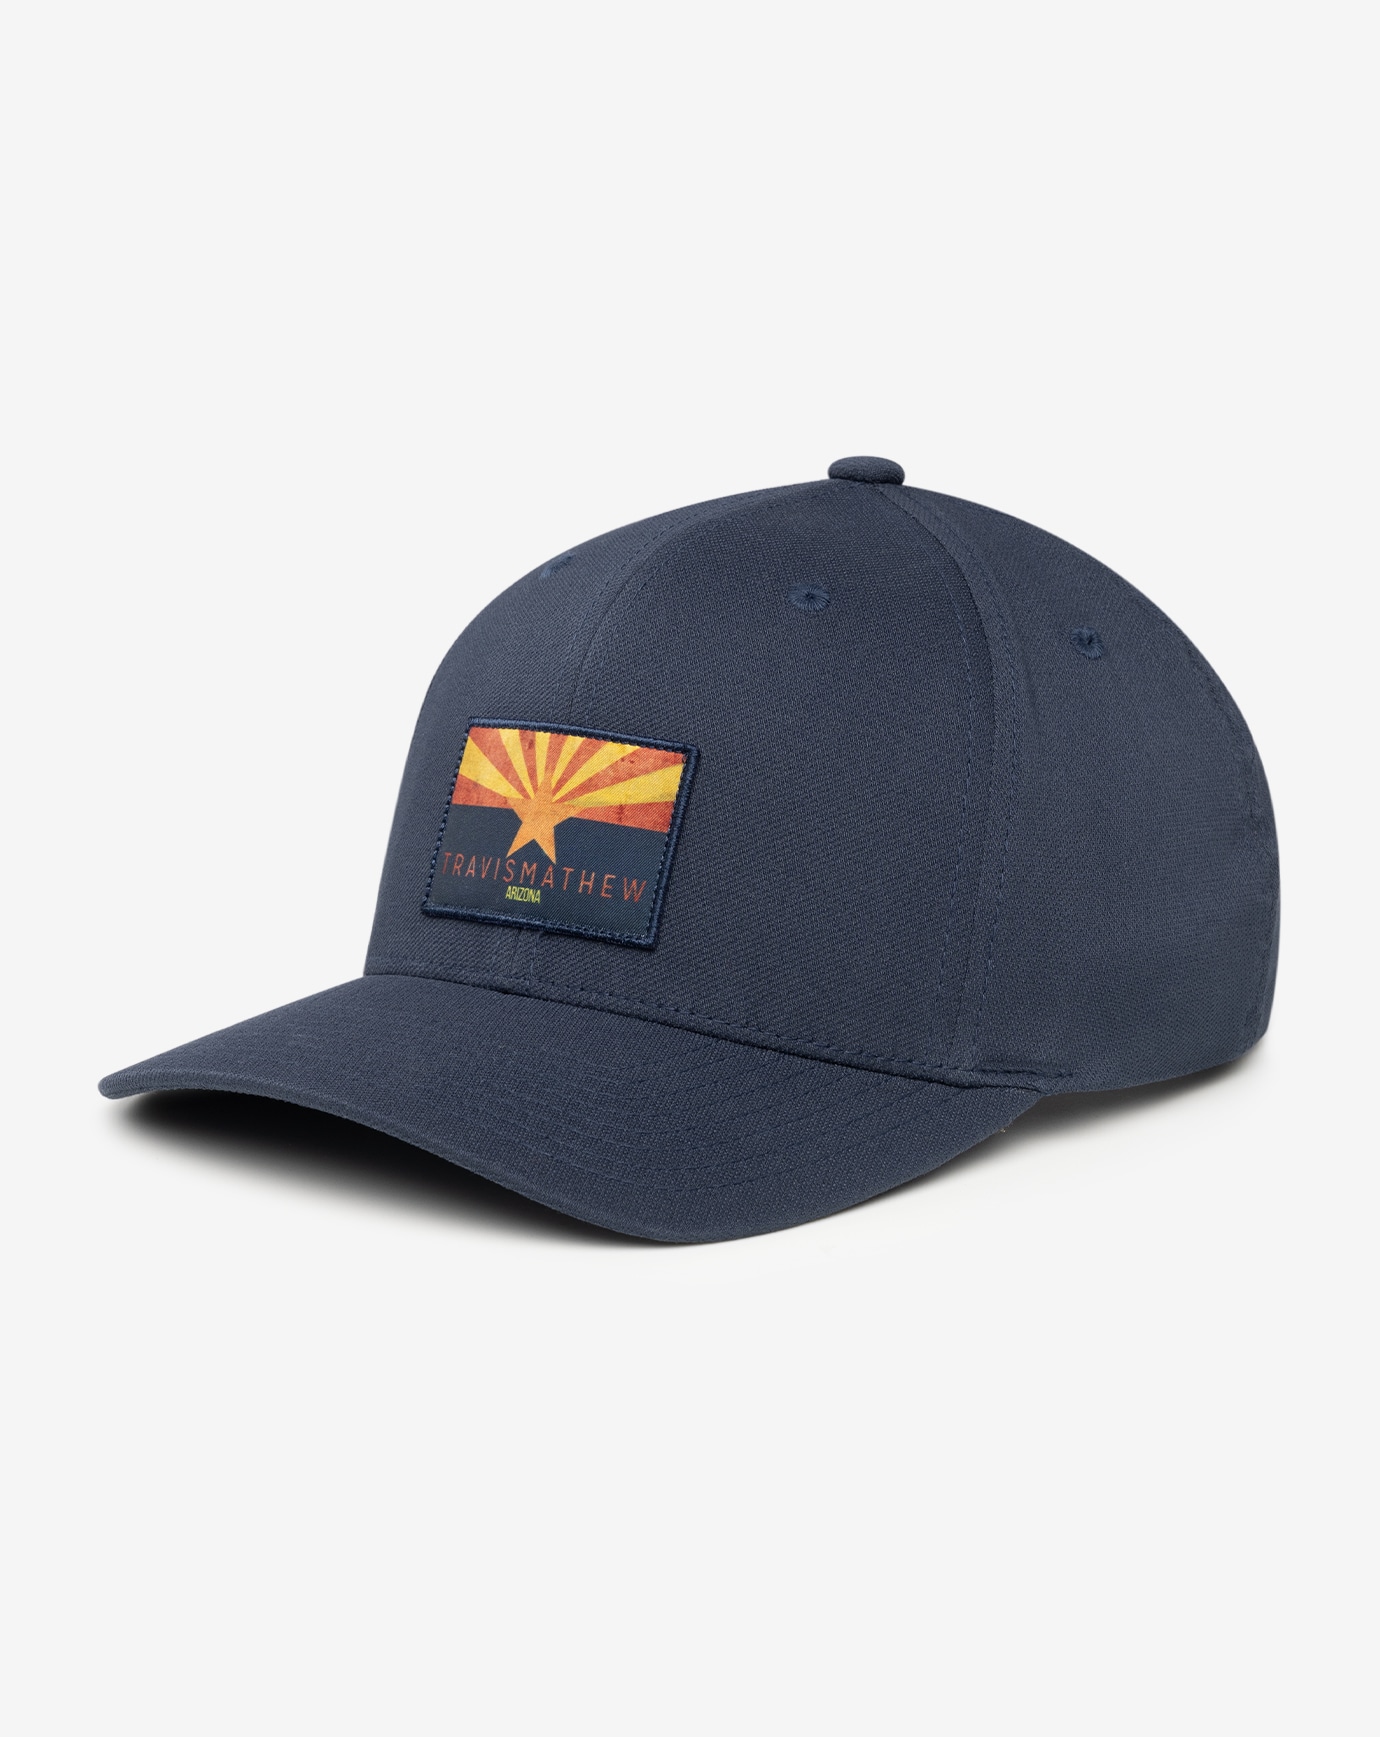 VALLEY OF THE SUN 2.0 SNAPBACK HAT Image Thumbnail 2